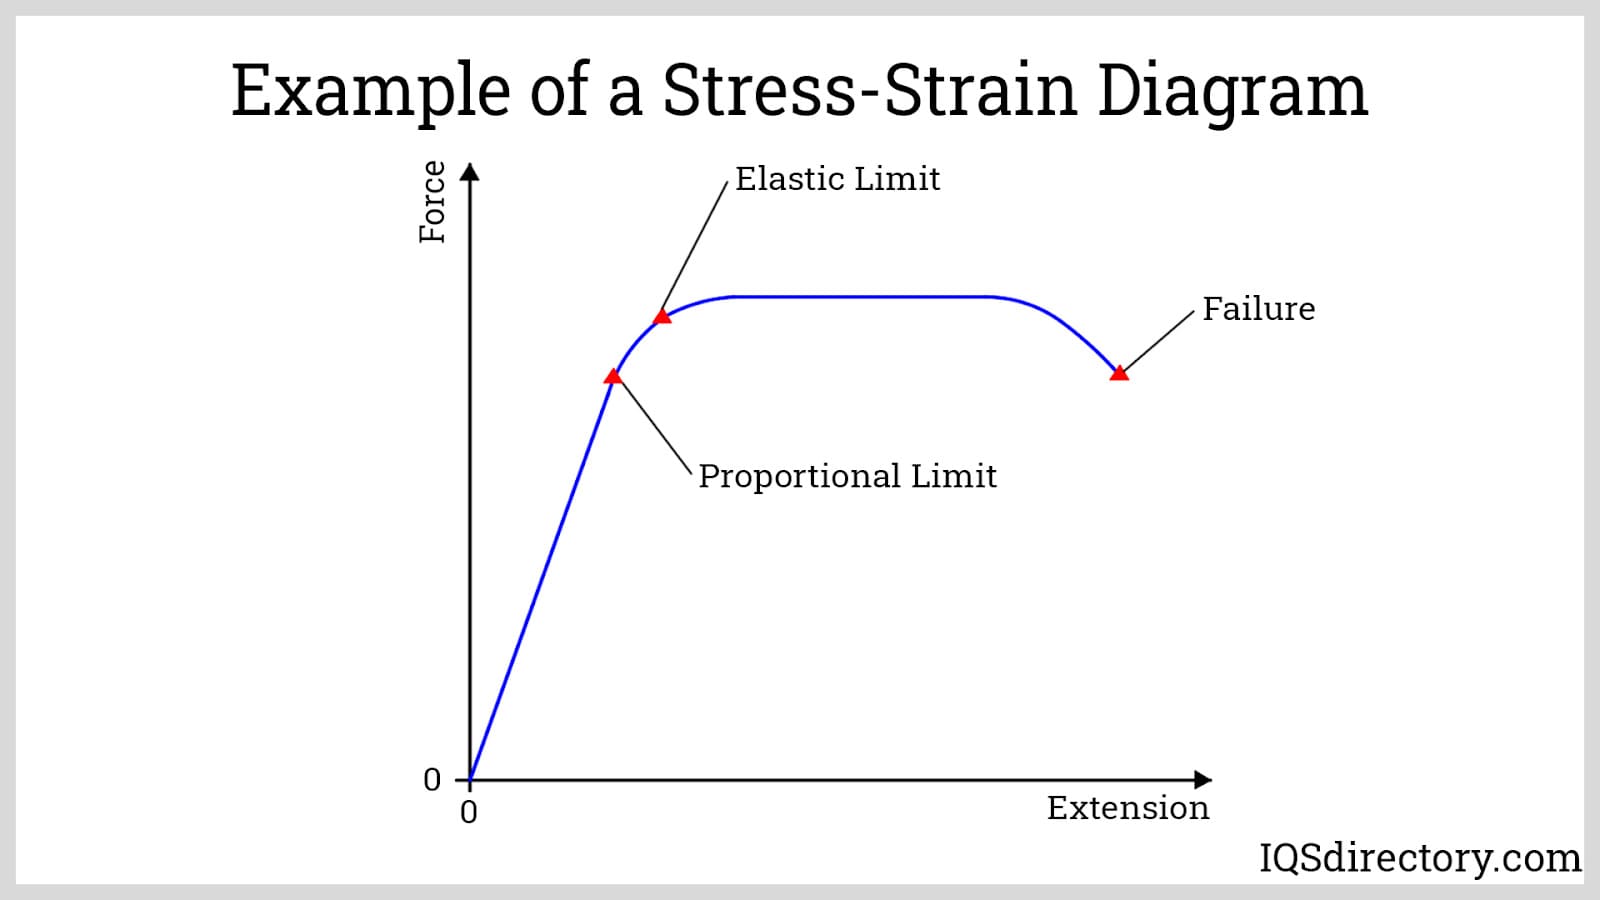 Example of a Stress-Strain Diagram